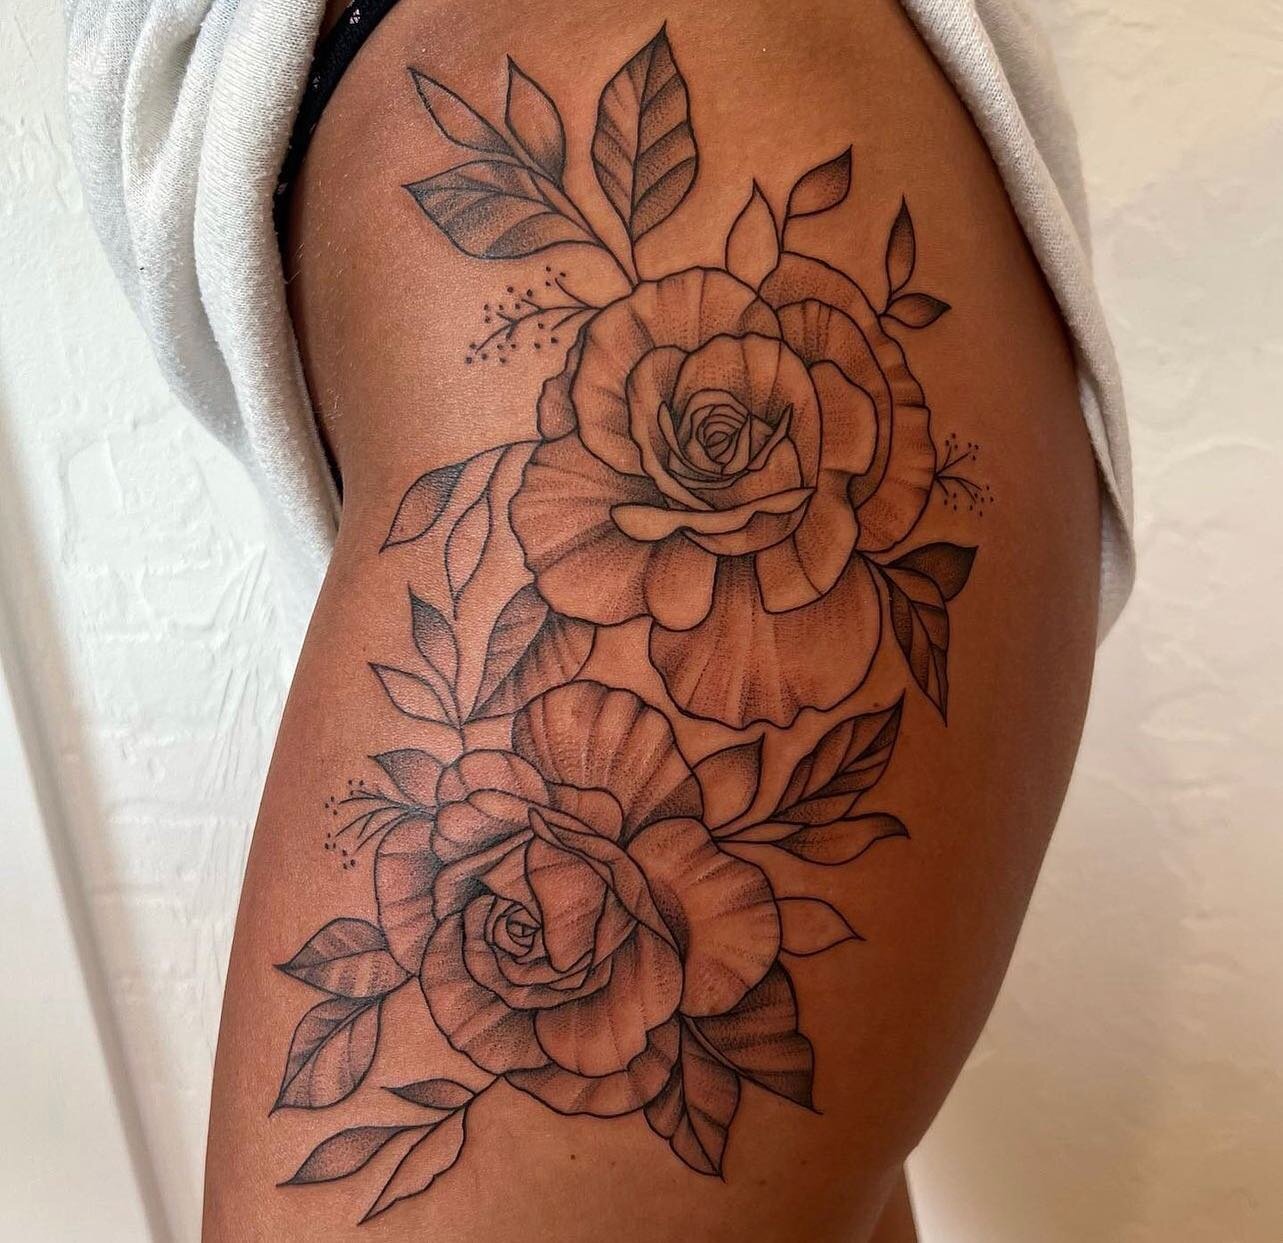 Gorgeous linework floral hip piece by @angela_houde 

#linework #lineworktattoo #lineworktattoos #pittsburghtattooartist #floraltattoo